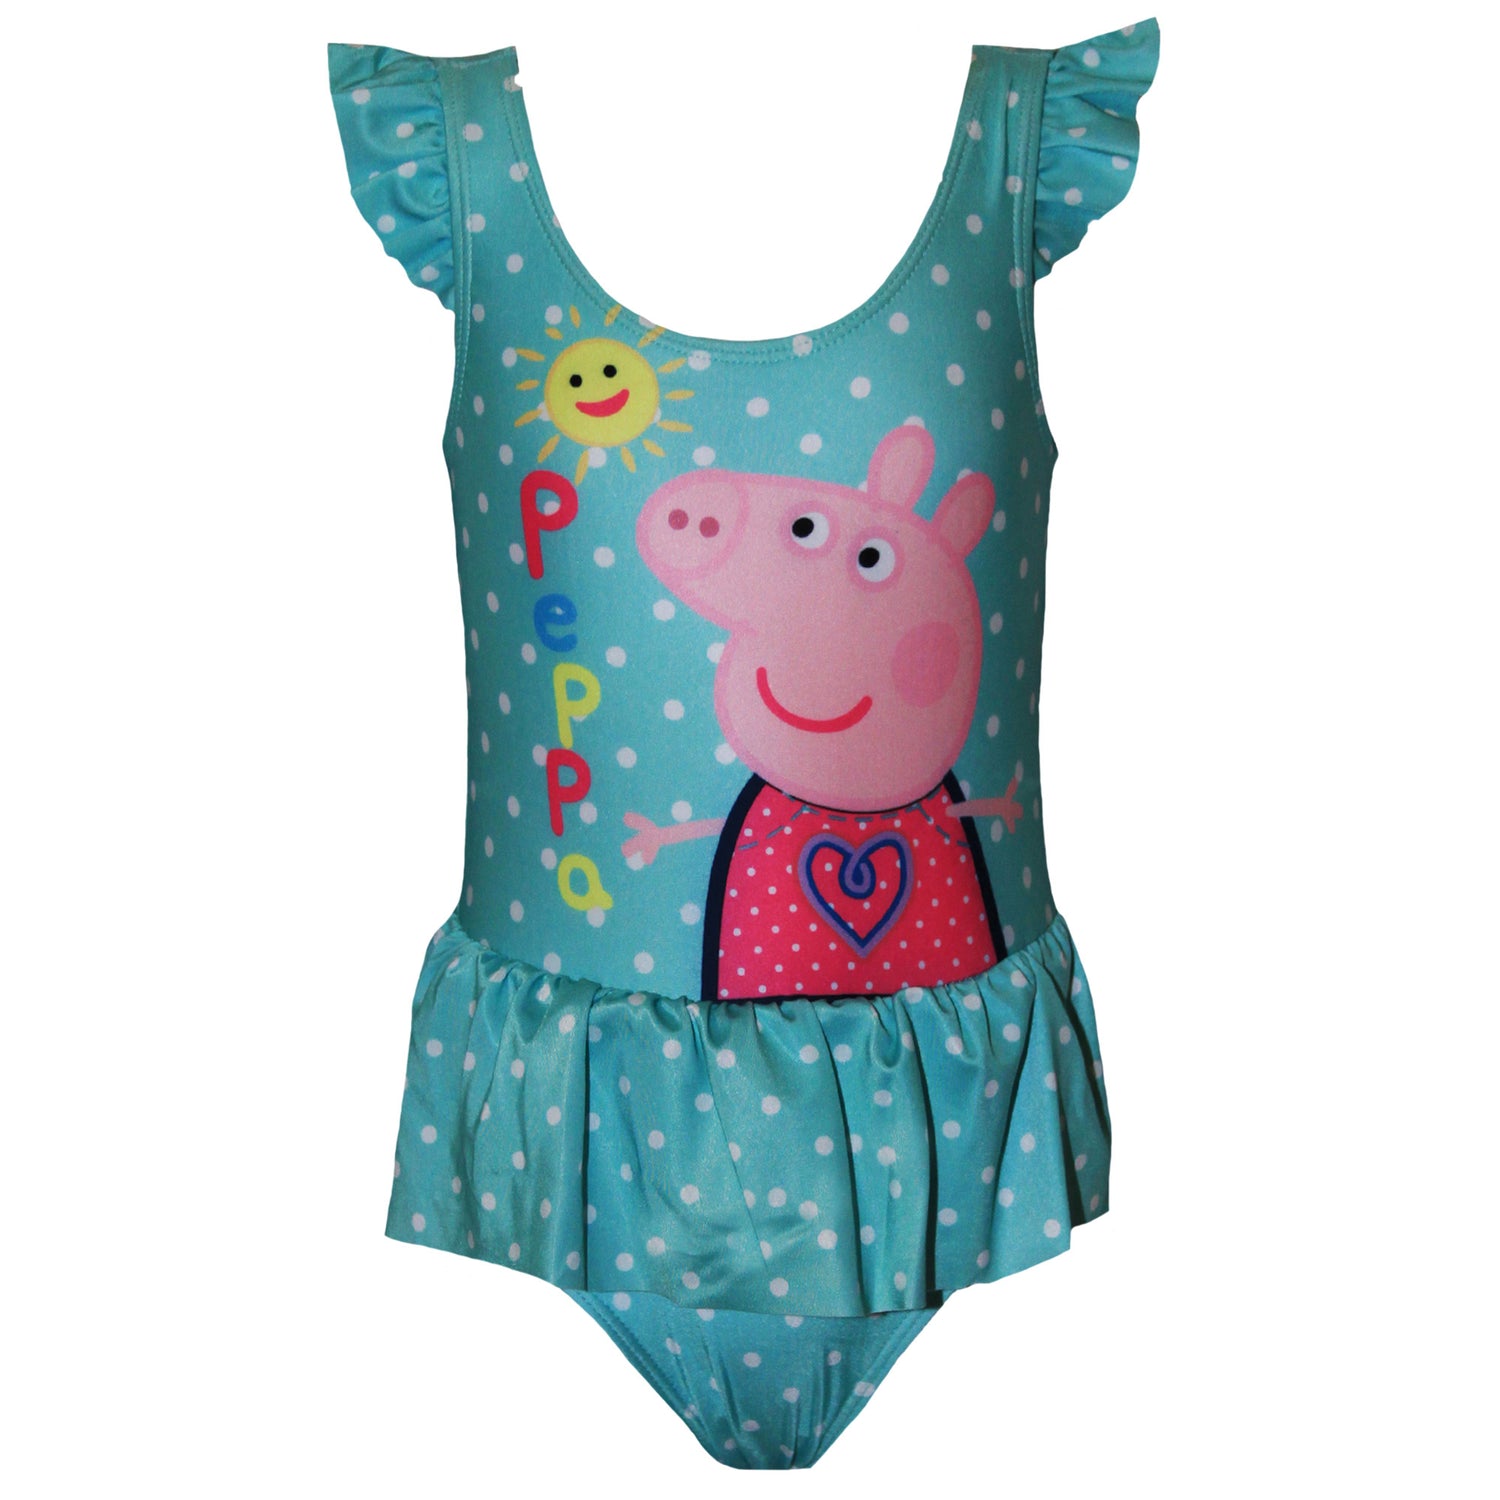 Peppa Pig Baby Girls Sunshine One Piece Swimsuit | Discounts on great ...